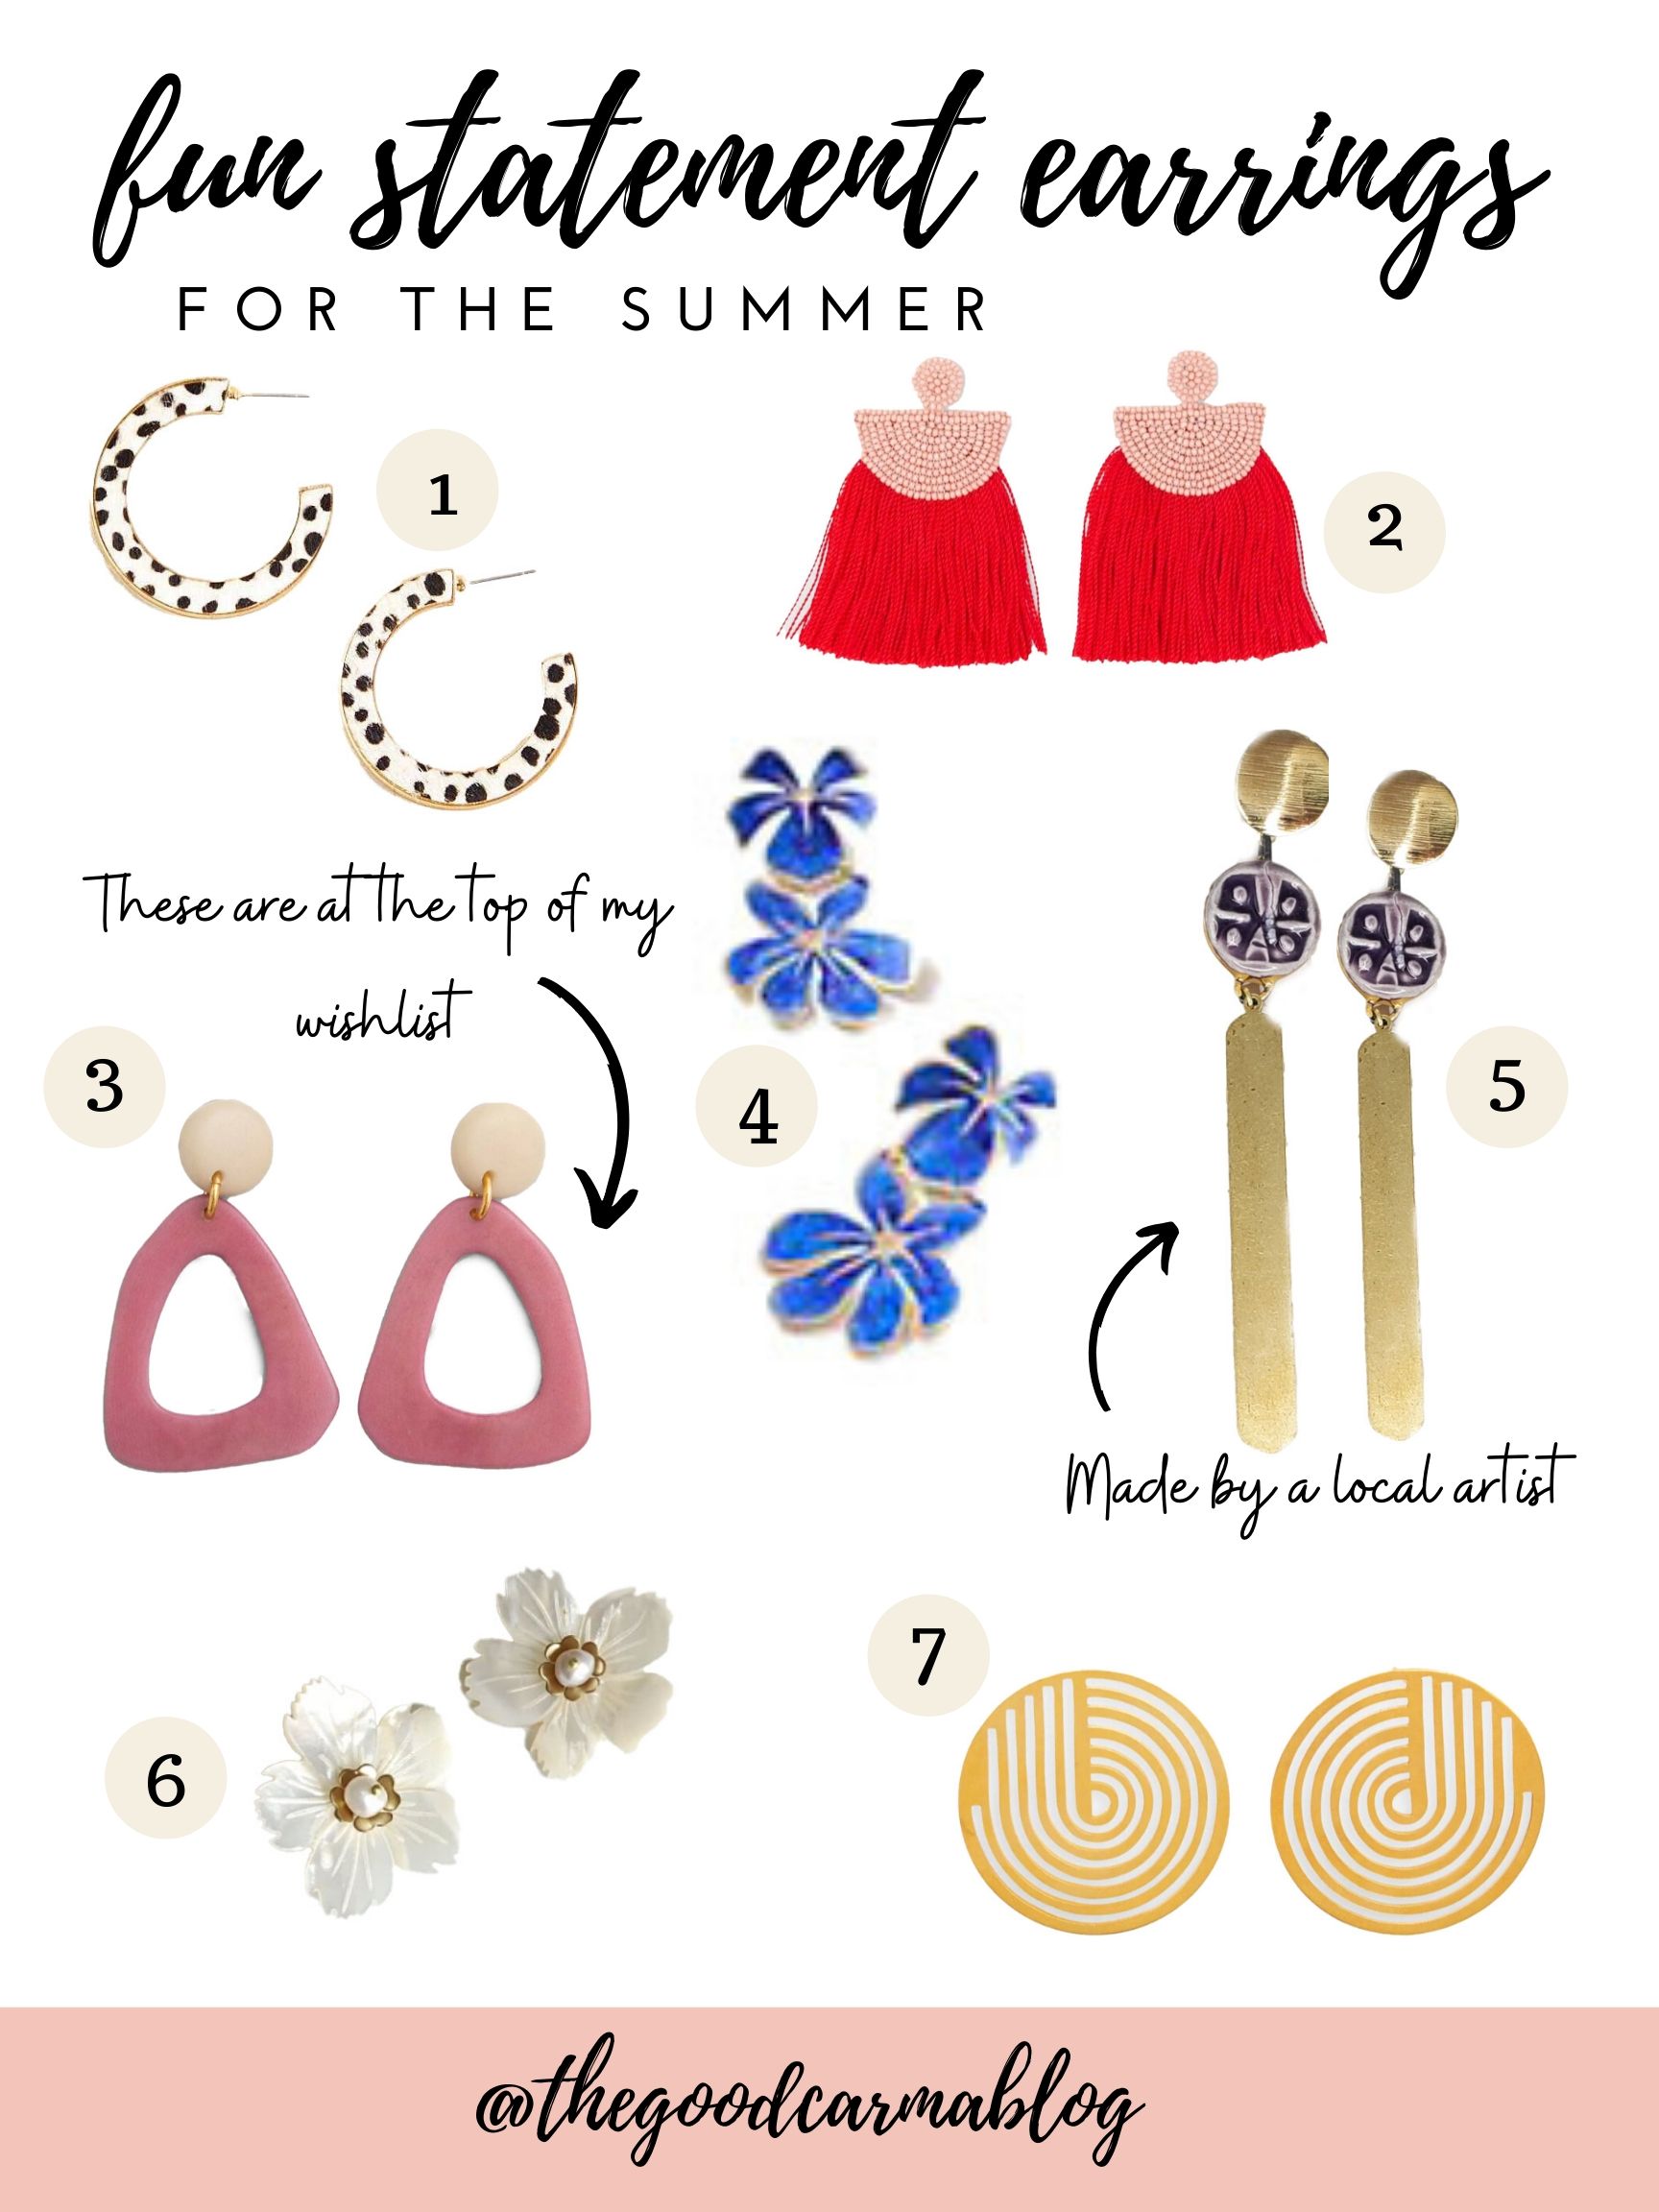 My Favorite Statement Earrings for the Summer!